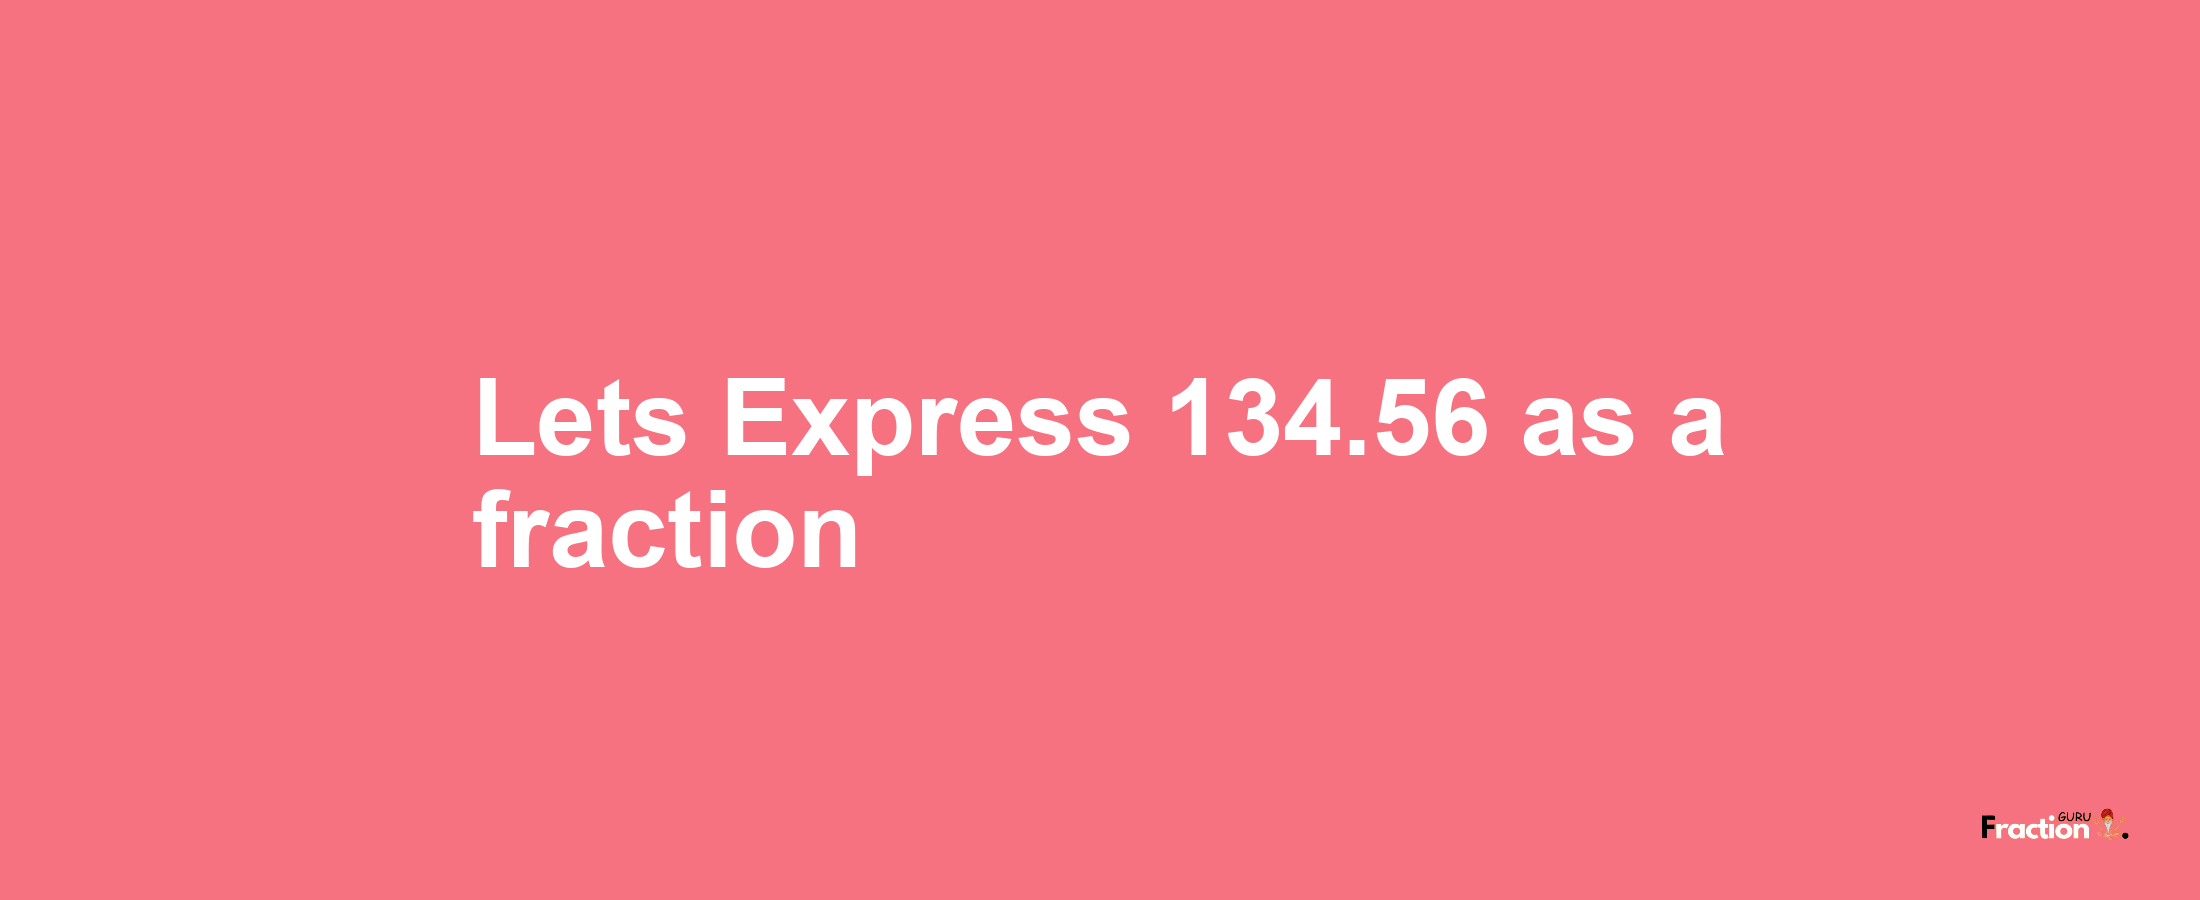 Lets Express 134.56 as afraction